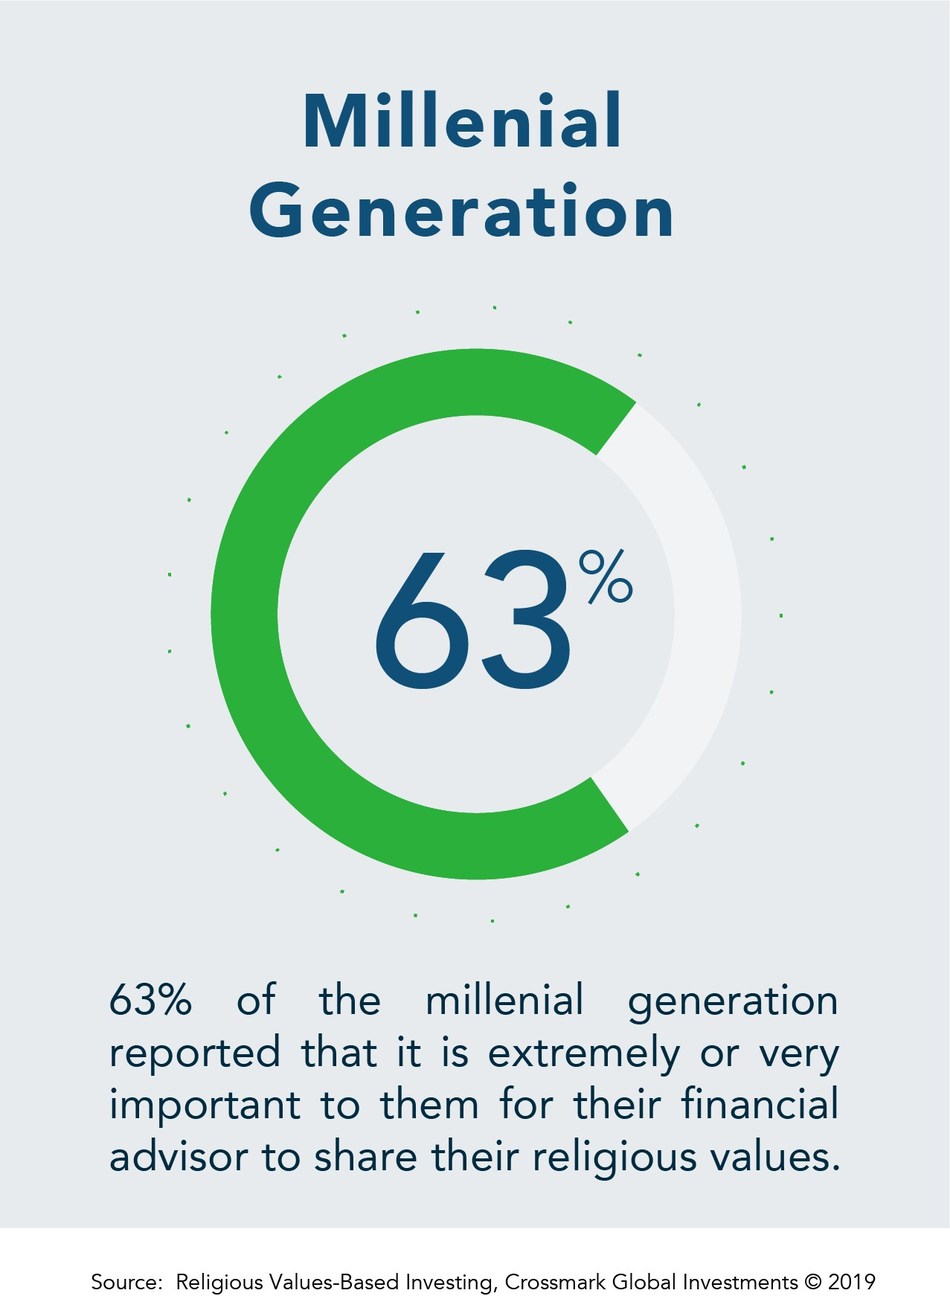 63% of the millennial generation reported that it is extremely or very important to them for their financial advisor to share their religious values.